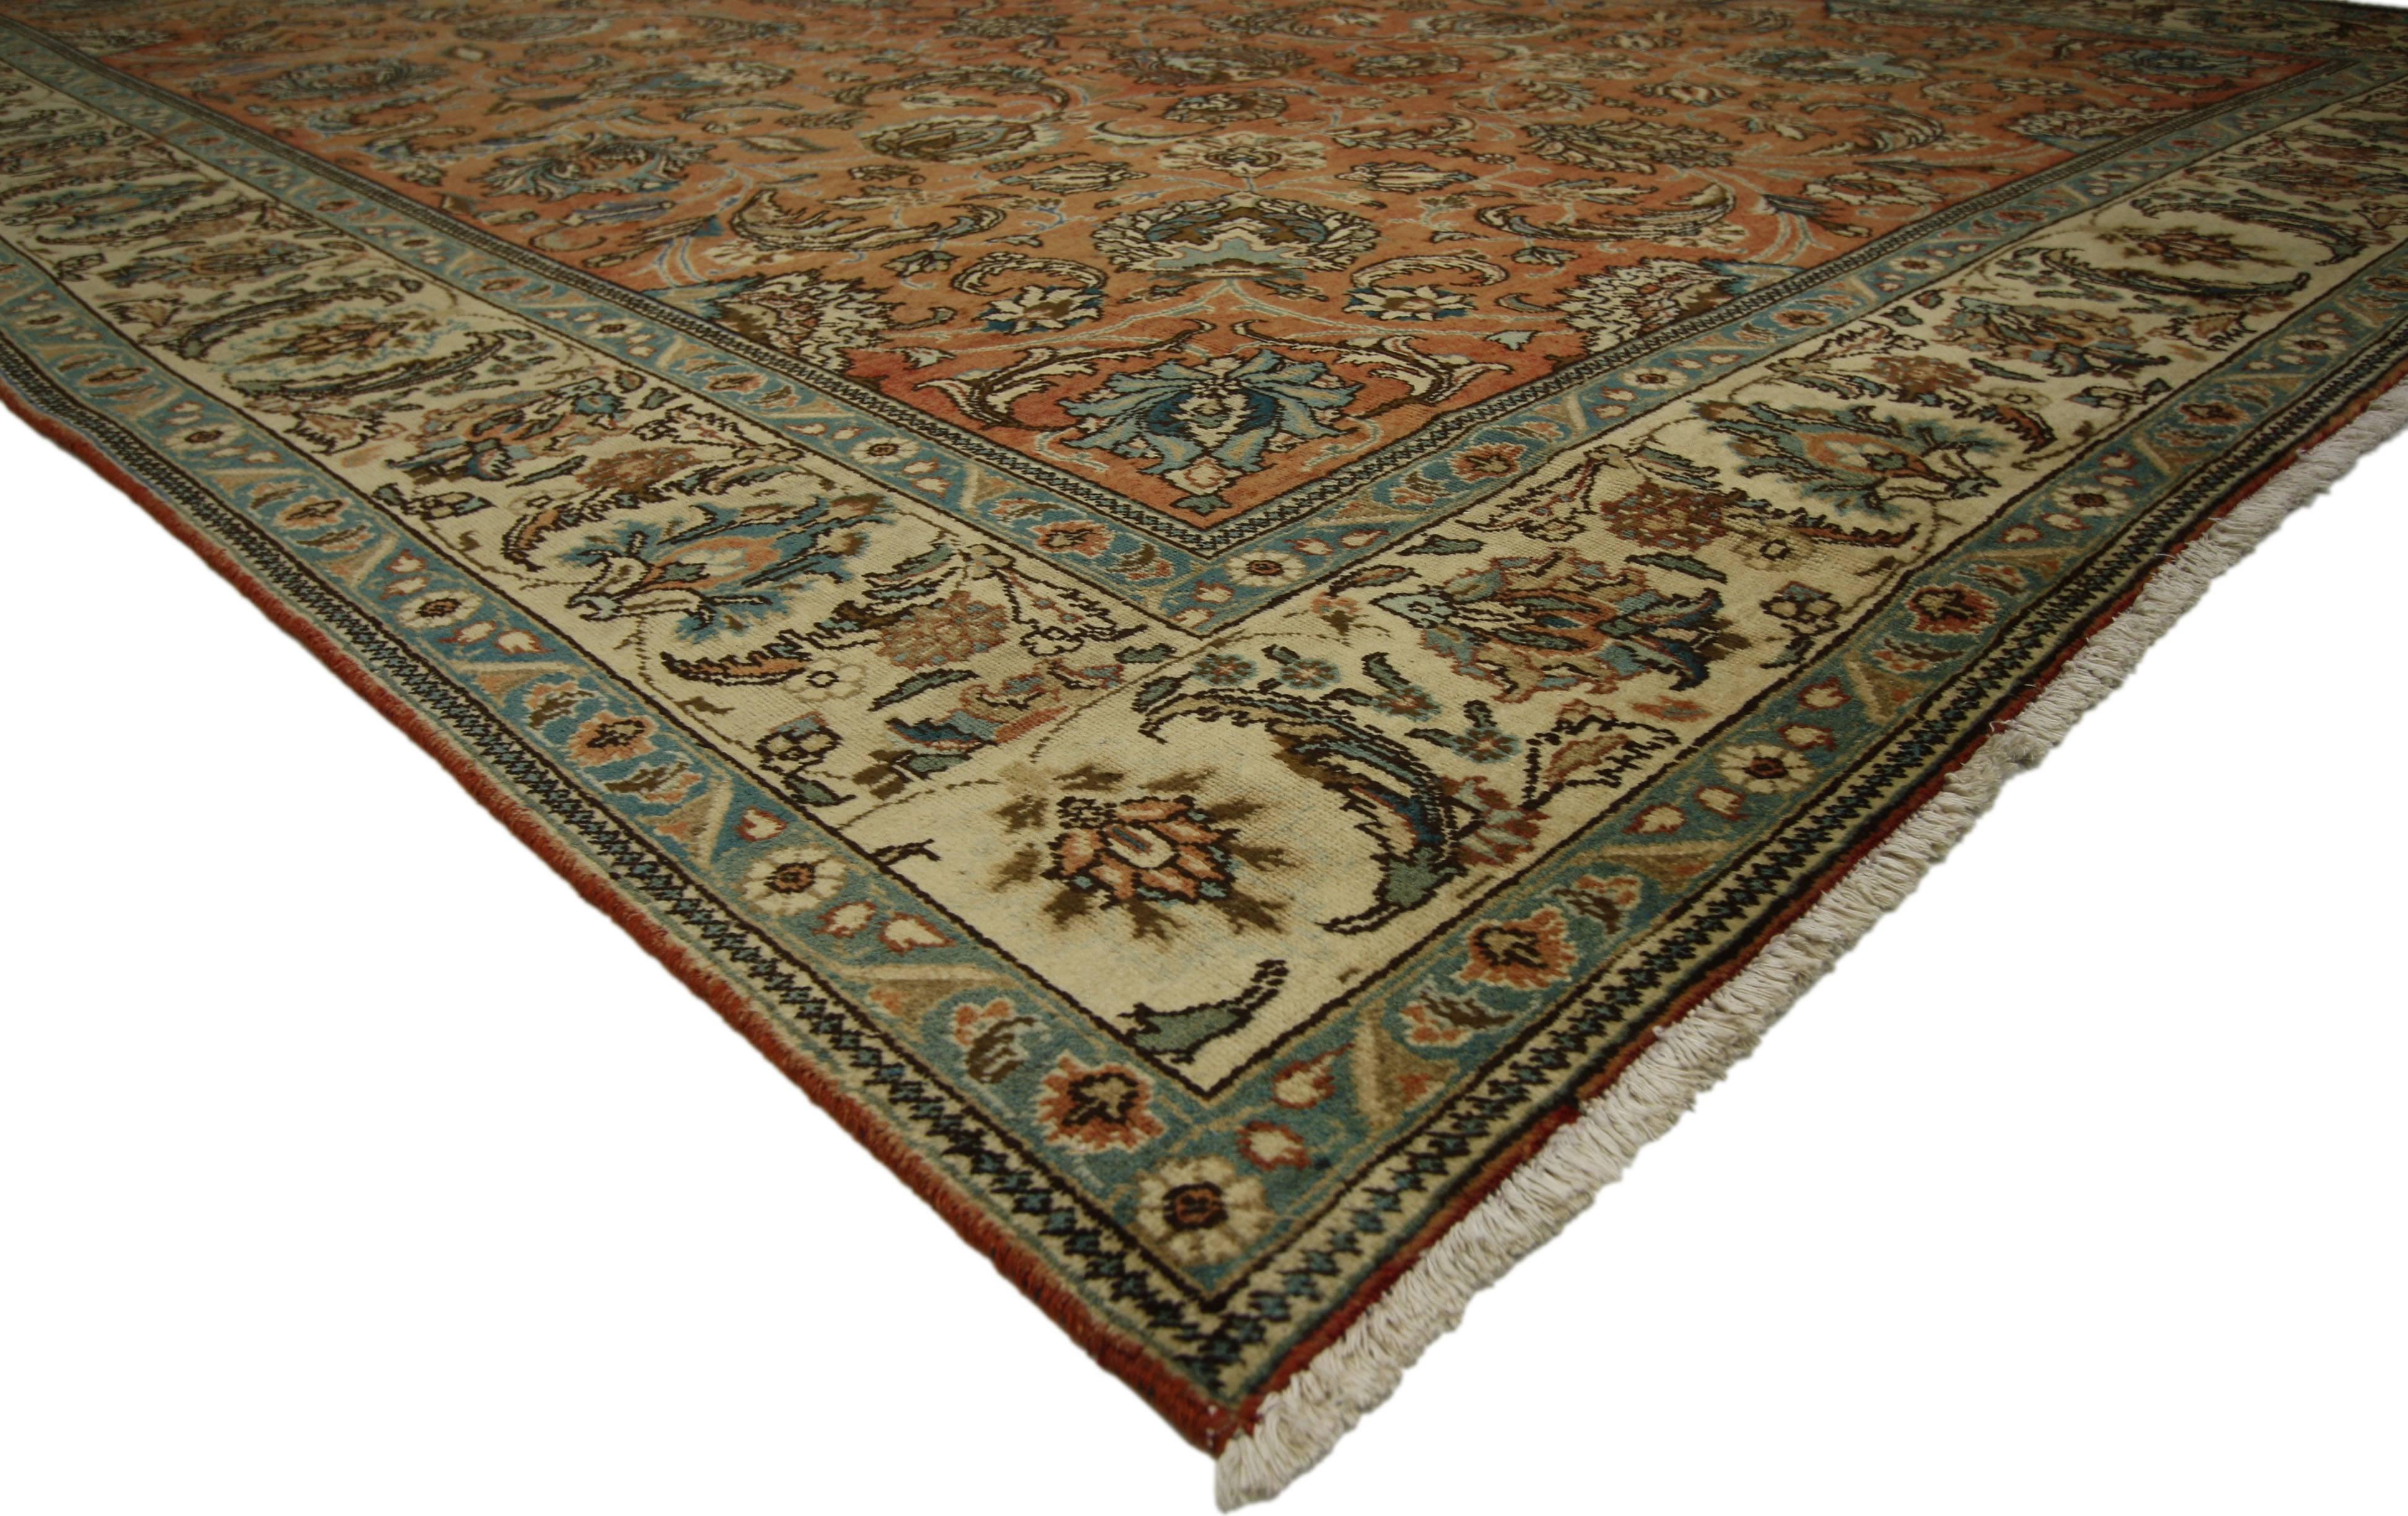 76281, vintage Persian Tabriz with traditional style. This hand-knotted wool vintage Persian Tabriz rug features an allover pattern surrounded by a classic border creating a well-balanced and timeless design. This vintage Persian Tabriz rug brings a